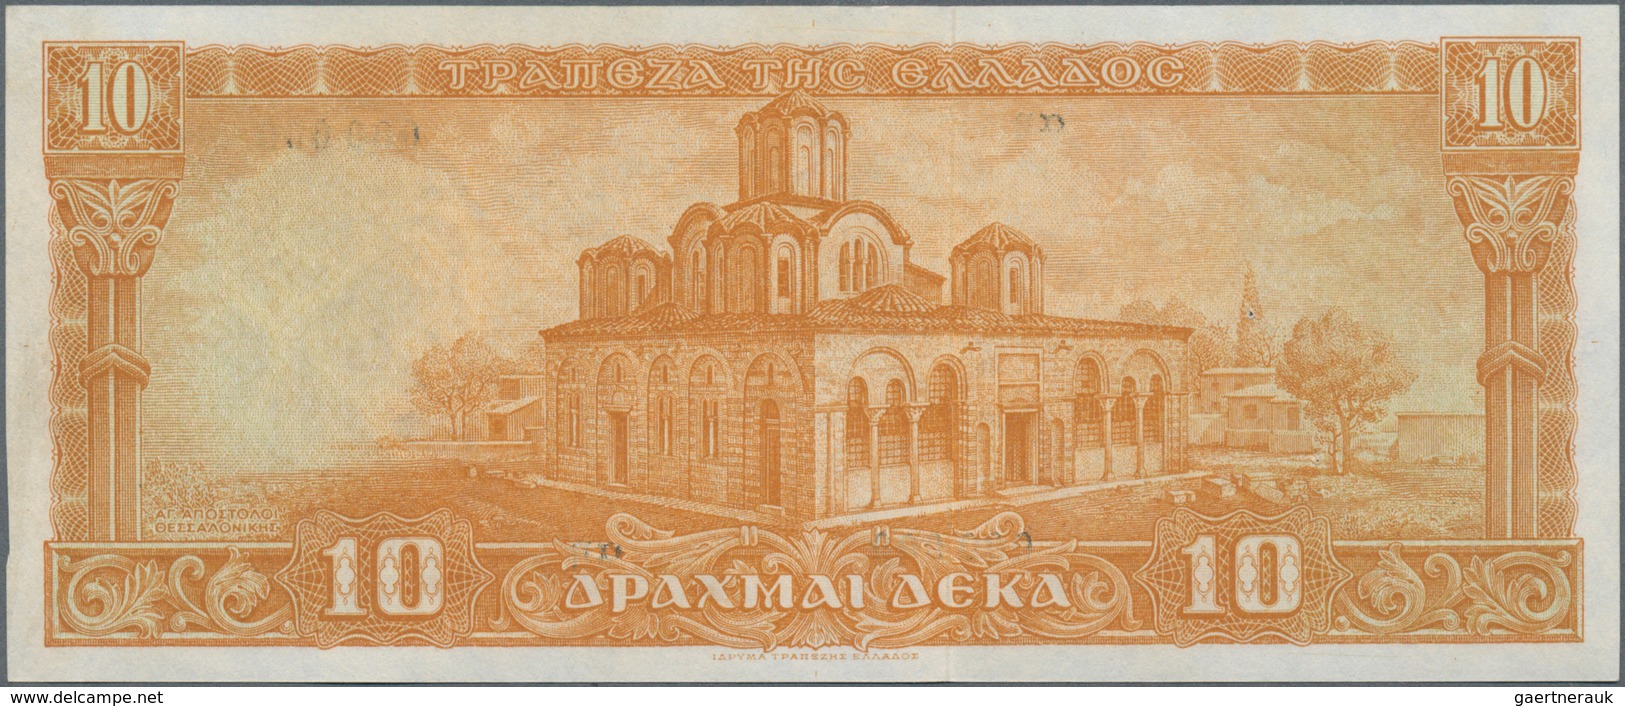 Greece / Griechenland: 10 Drachmai 1954 SPECIMEN, P.189as, Serial Number 000000 And Red Overprint "S - Grecia